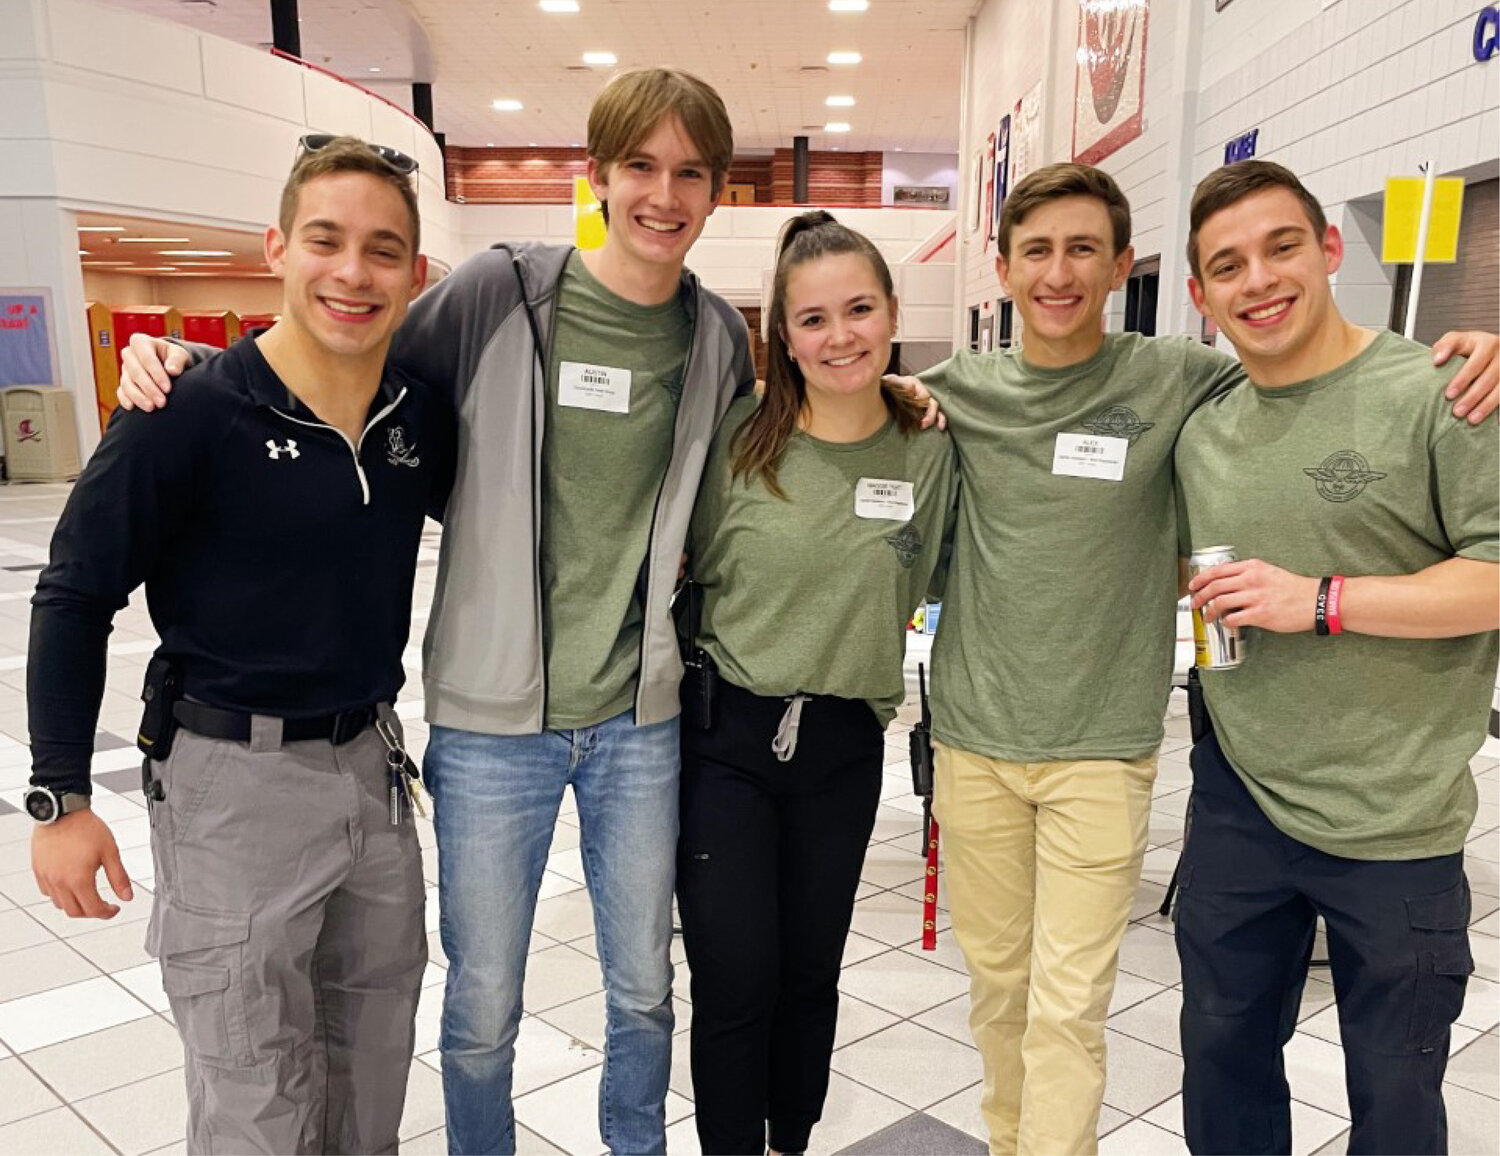 Tech students pose for a group photo. From left: Dominick Coker (Parking Lot/Fundraising Lead), Austin McCowan (Recruitment Lead), Maggie Teat (Promotions Lead), Alex Stovall (Head Lead), Alexander Coker (Hospitality Lead).